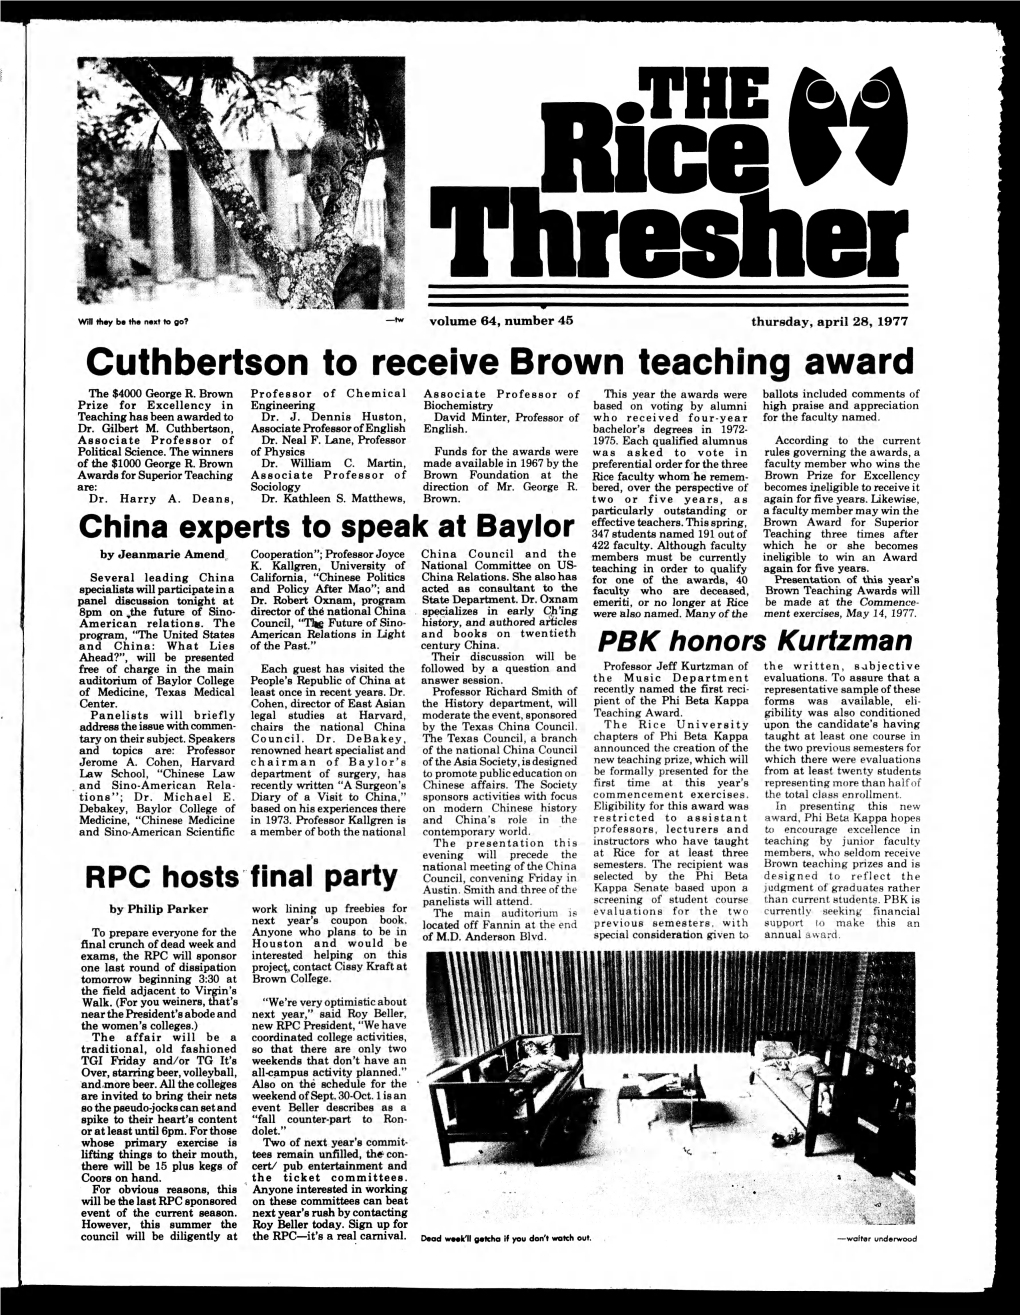 Cuthbertson to Receive Brown Teaching Award the $4000 George R